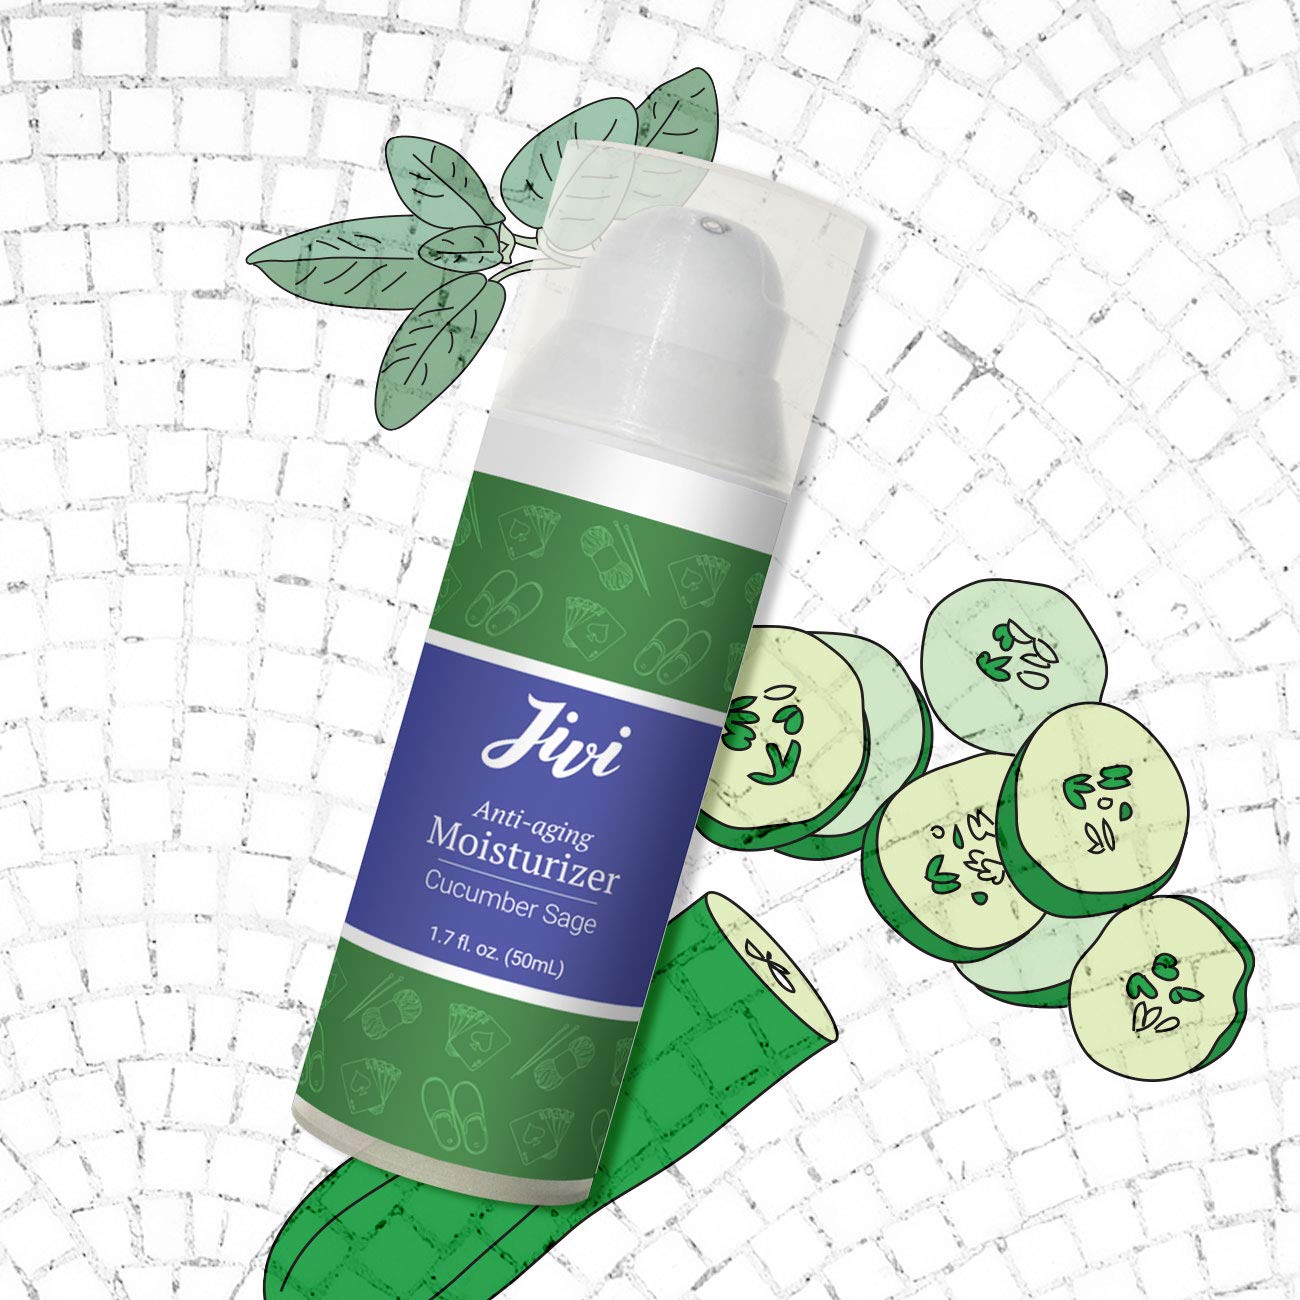 Anti-Aging Moisturizer (Cucumber Sage) | Repair Wrinkles, Age Spots, Dark Circles, & Puffiness | 100% Natural with Organic Ingredients | Made for All Skin Types Including Sensitive Skin | 1.7 fl. oz